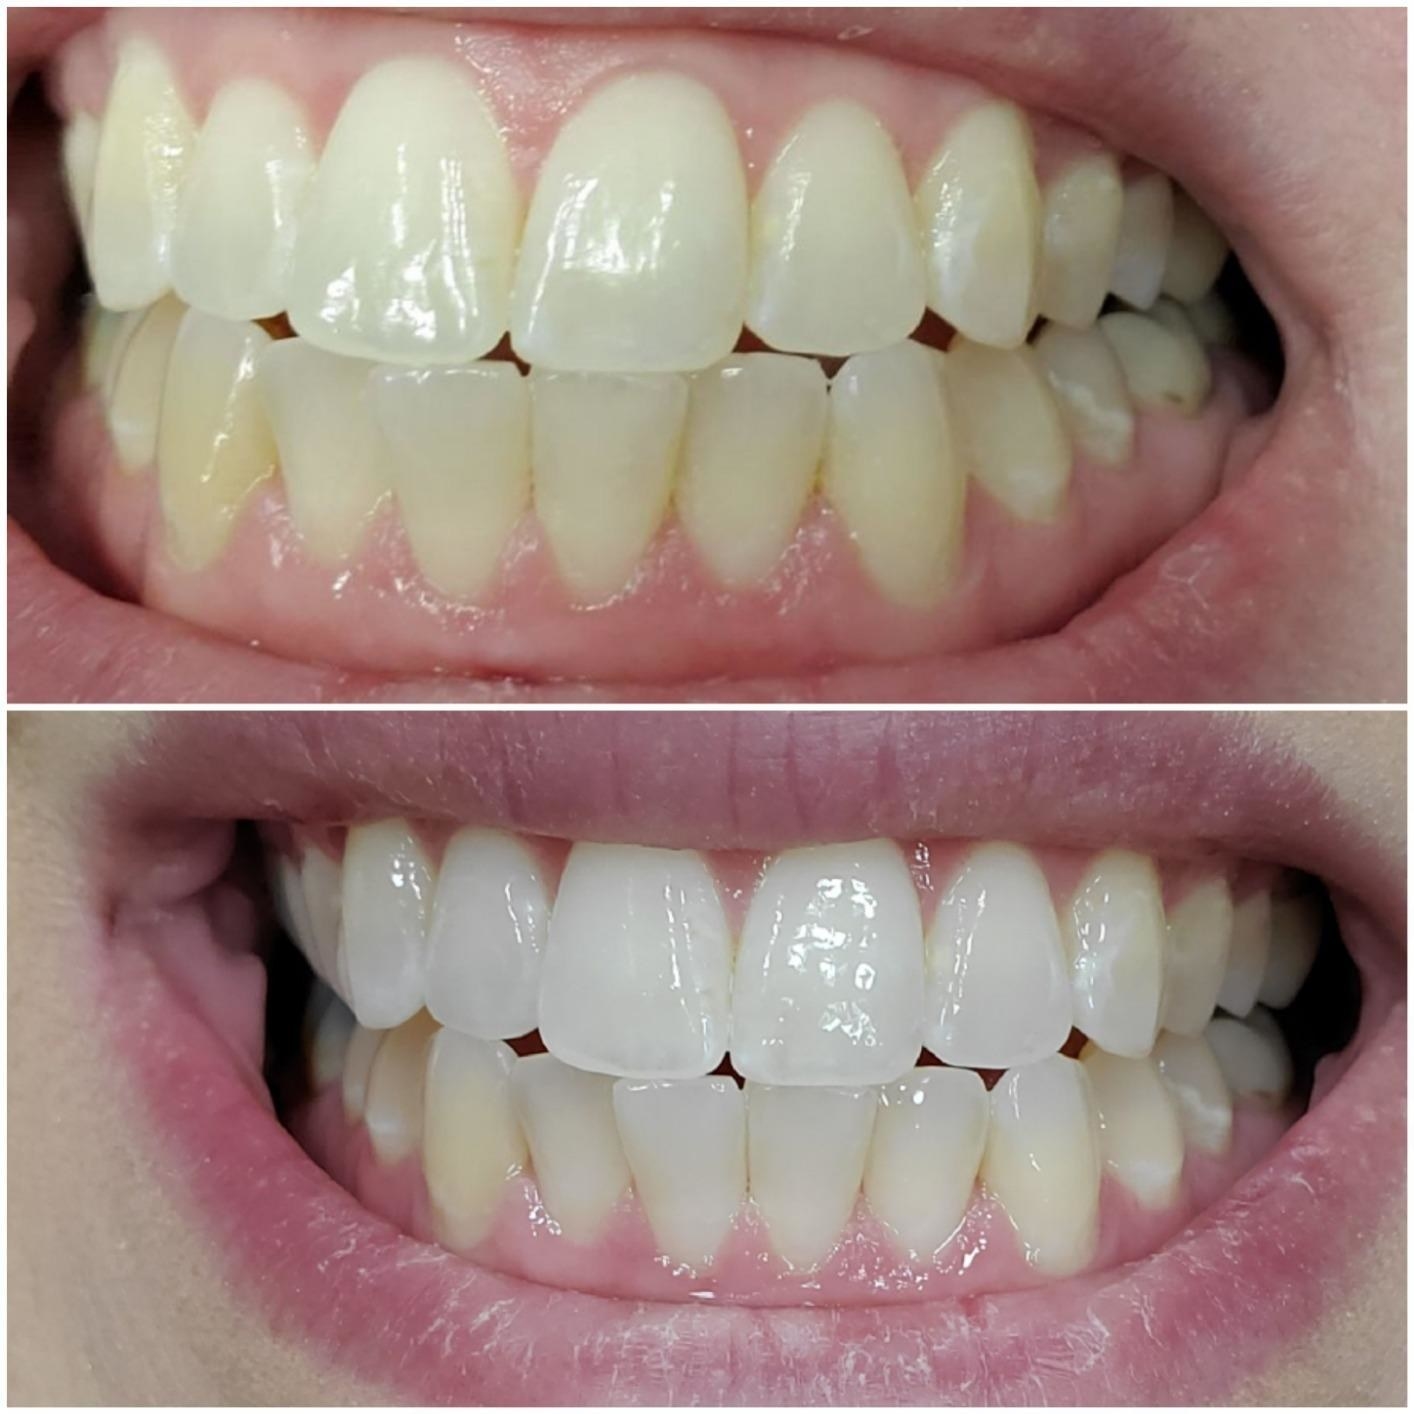 reviewer's before pic with yellow teeth and then after pic with much whiter teeth